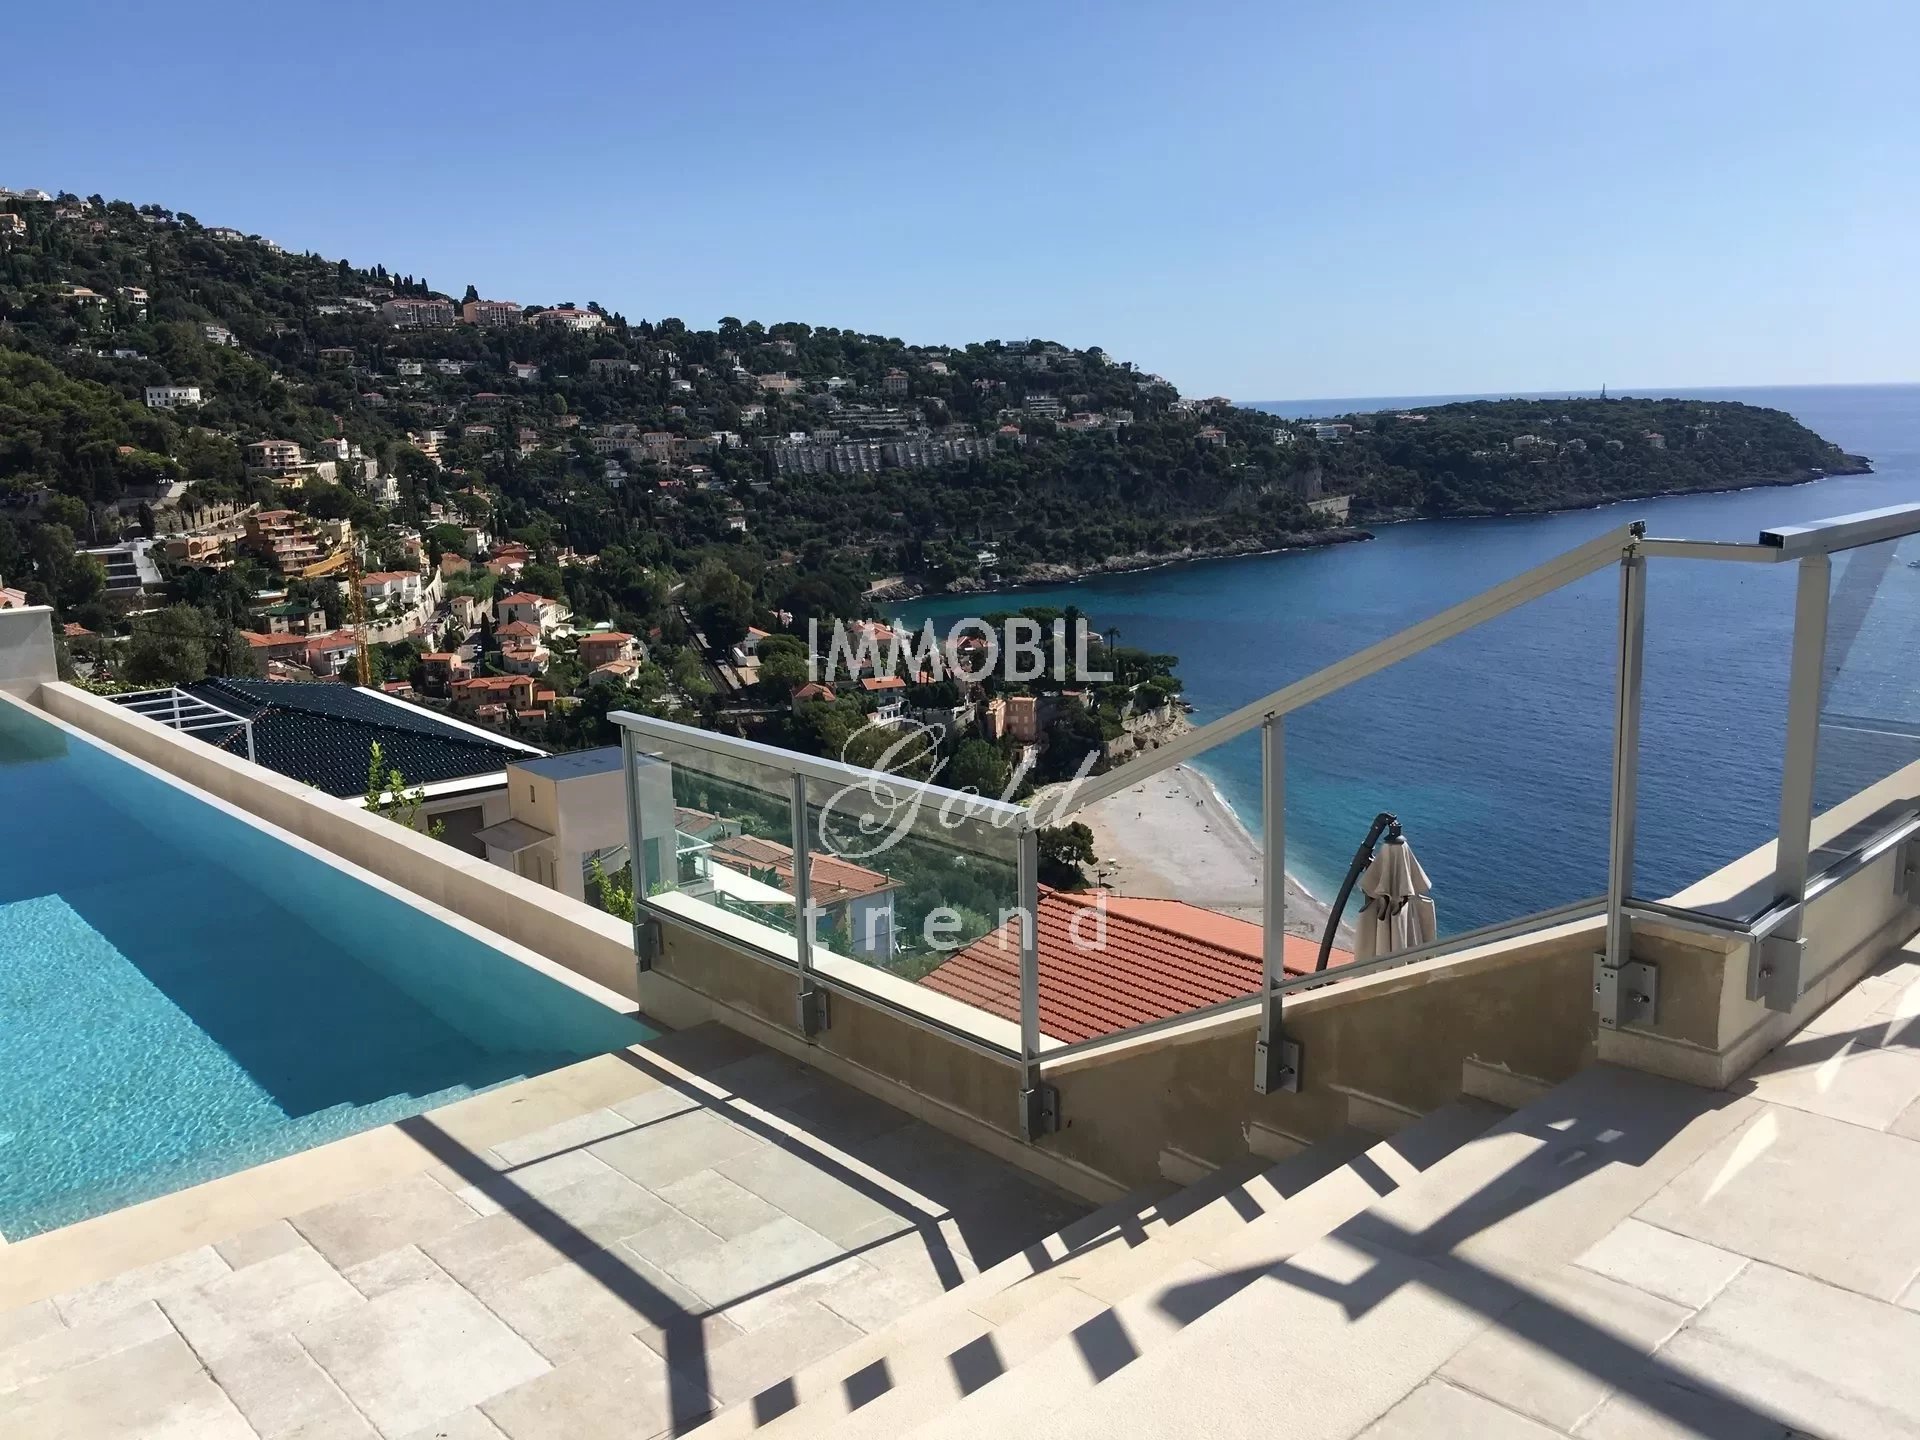 Real estate Roquebrune Cap Martin - For sale, villa composed of four apartments, with swimming pool and panoramic sea view, close to Monaco